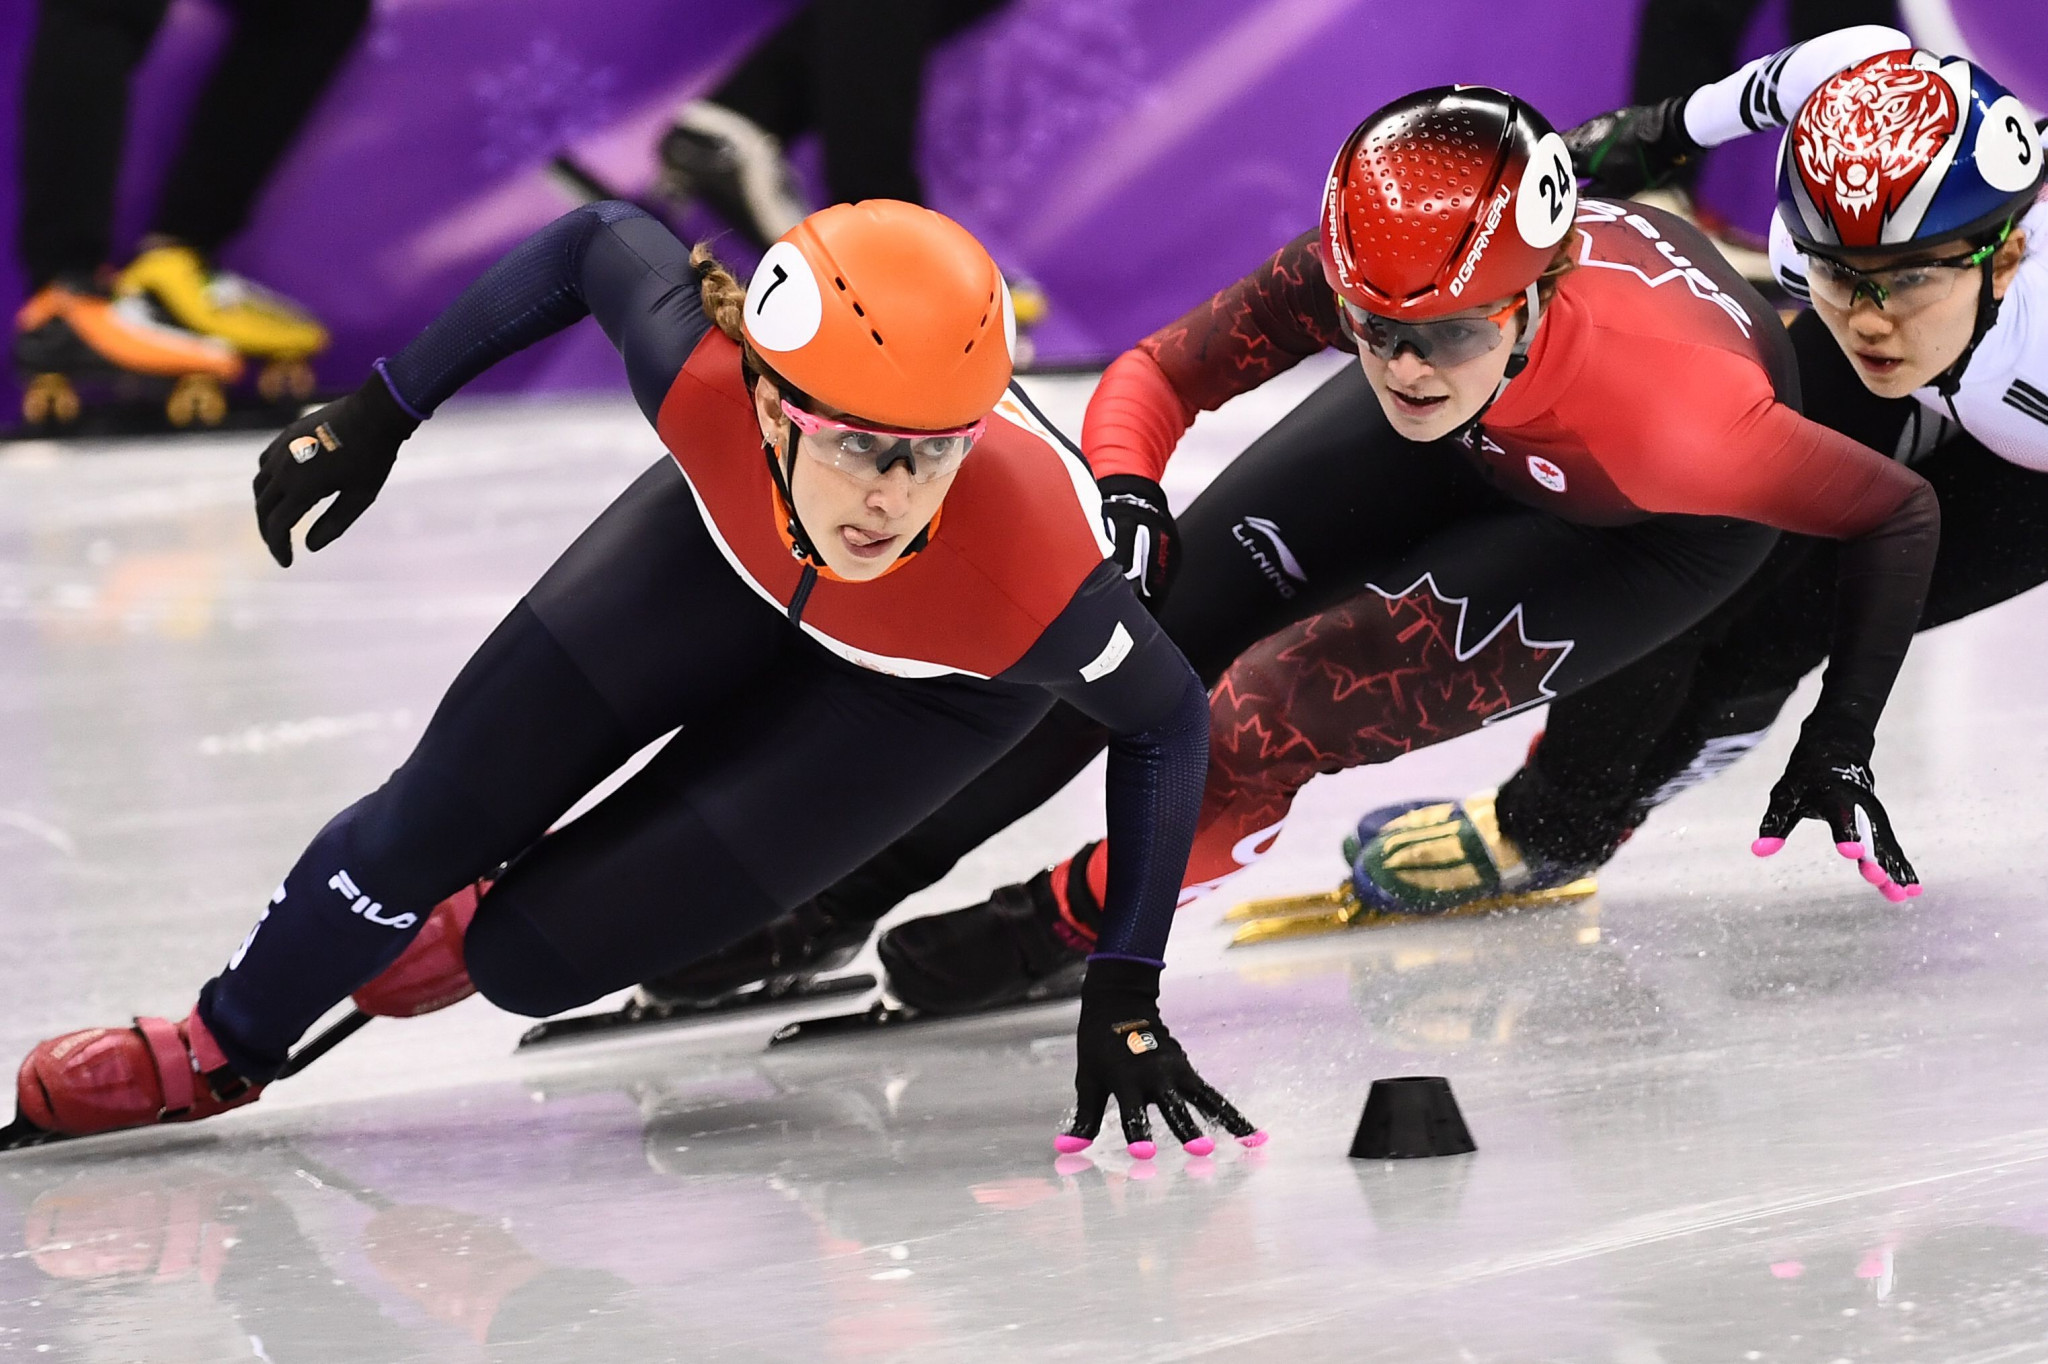 Olympic champions Schulting and Choi come through same heat at ISU Short Track World Cup in Salt Lake City